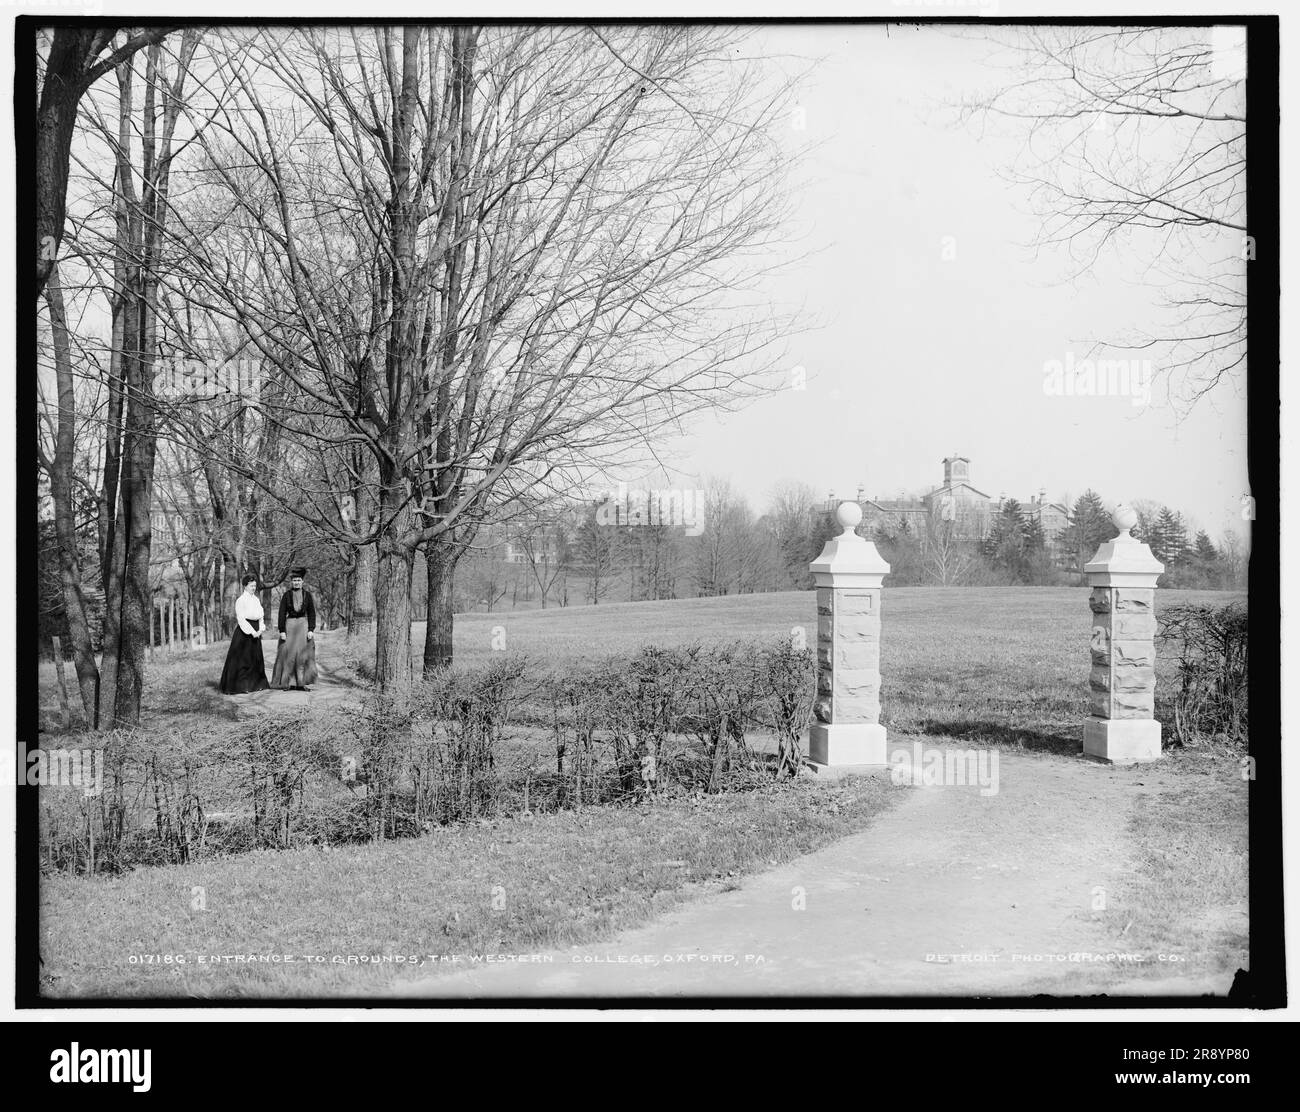 Entrance to grounds, the Western College, Oxford, Pa. i.e. Ohio, between 1900 and 1906. Stock Photo